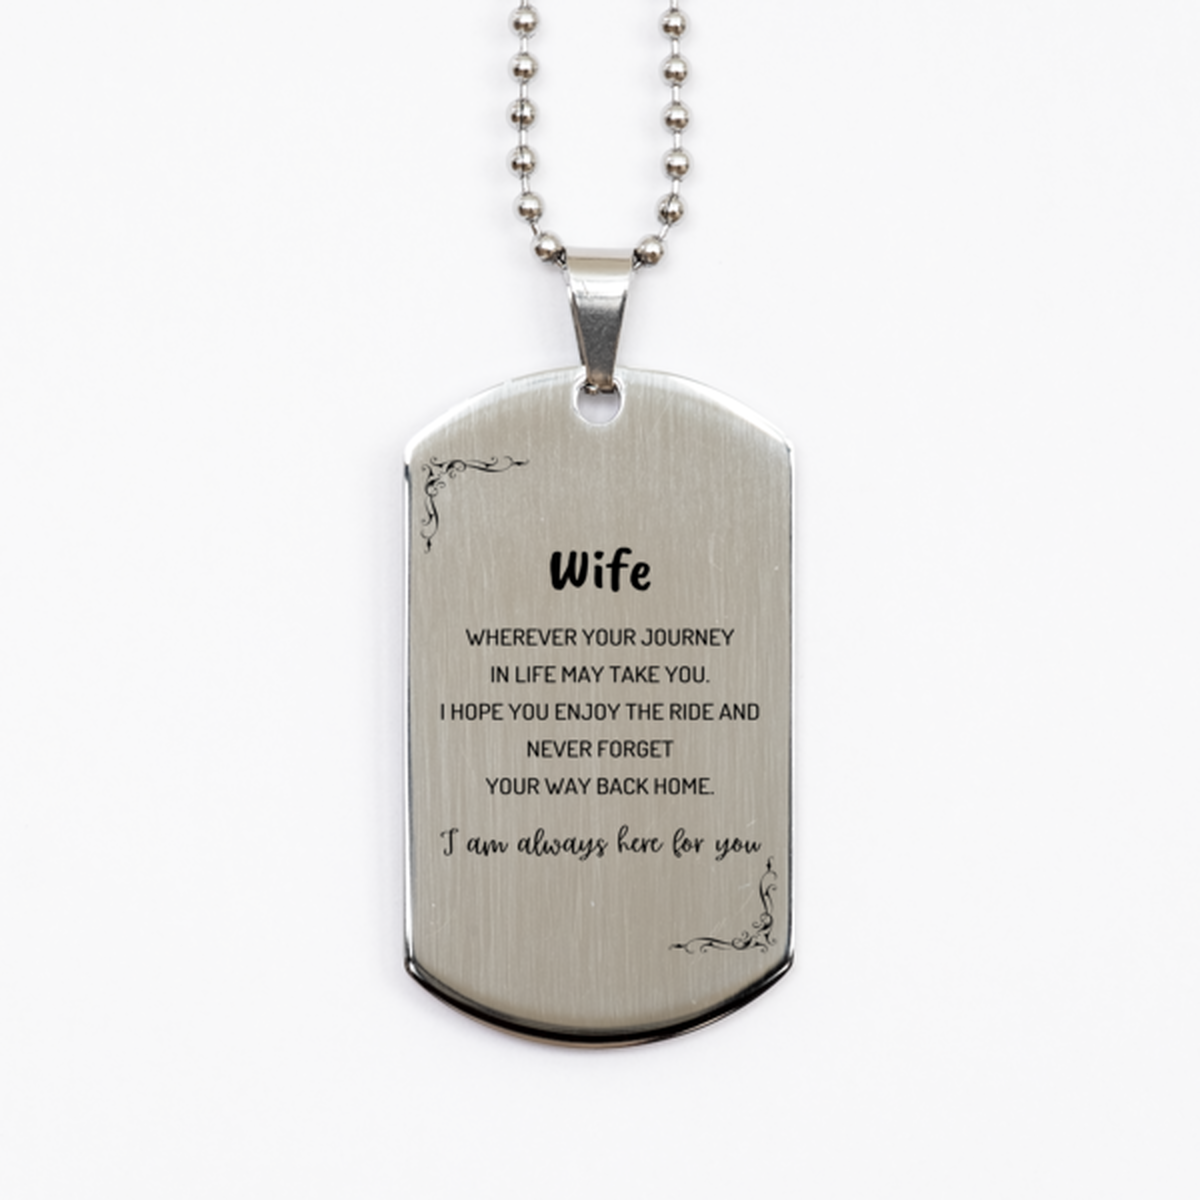 Wife wherever your journey in life may take you, I am always here for you Wife Silver Dog Tag, Awesome Christmas Gifts For Wife, Wife Birthday Gifts for Men Women Family Loved One